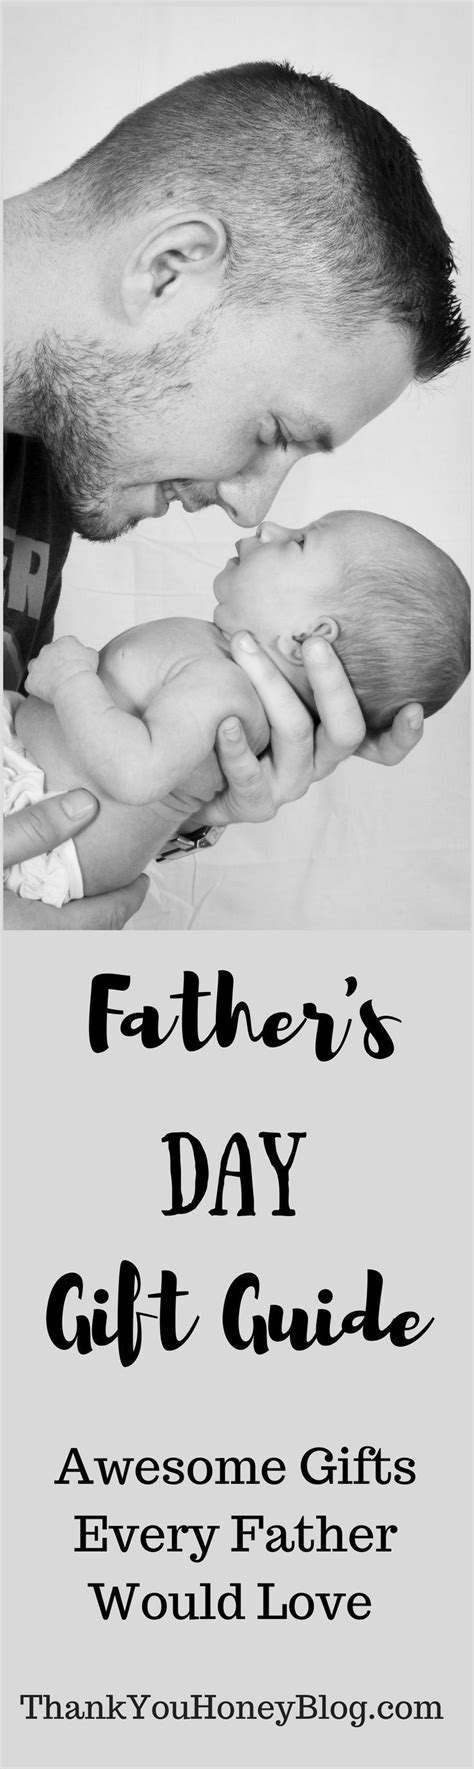 A Fathers Day T Guide With The Words Awesome Ts Every Father Would Love